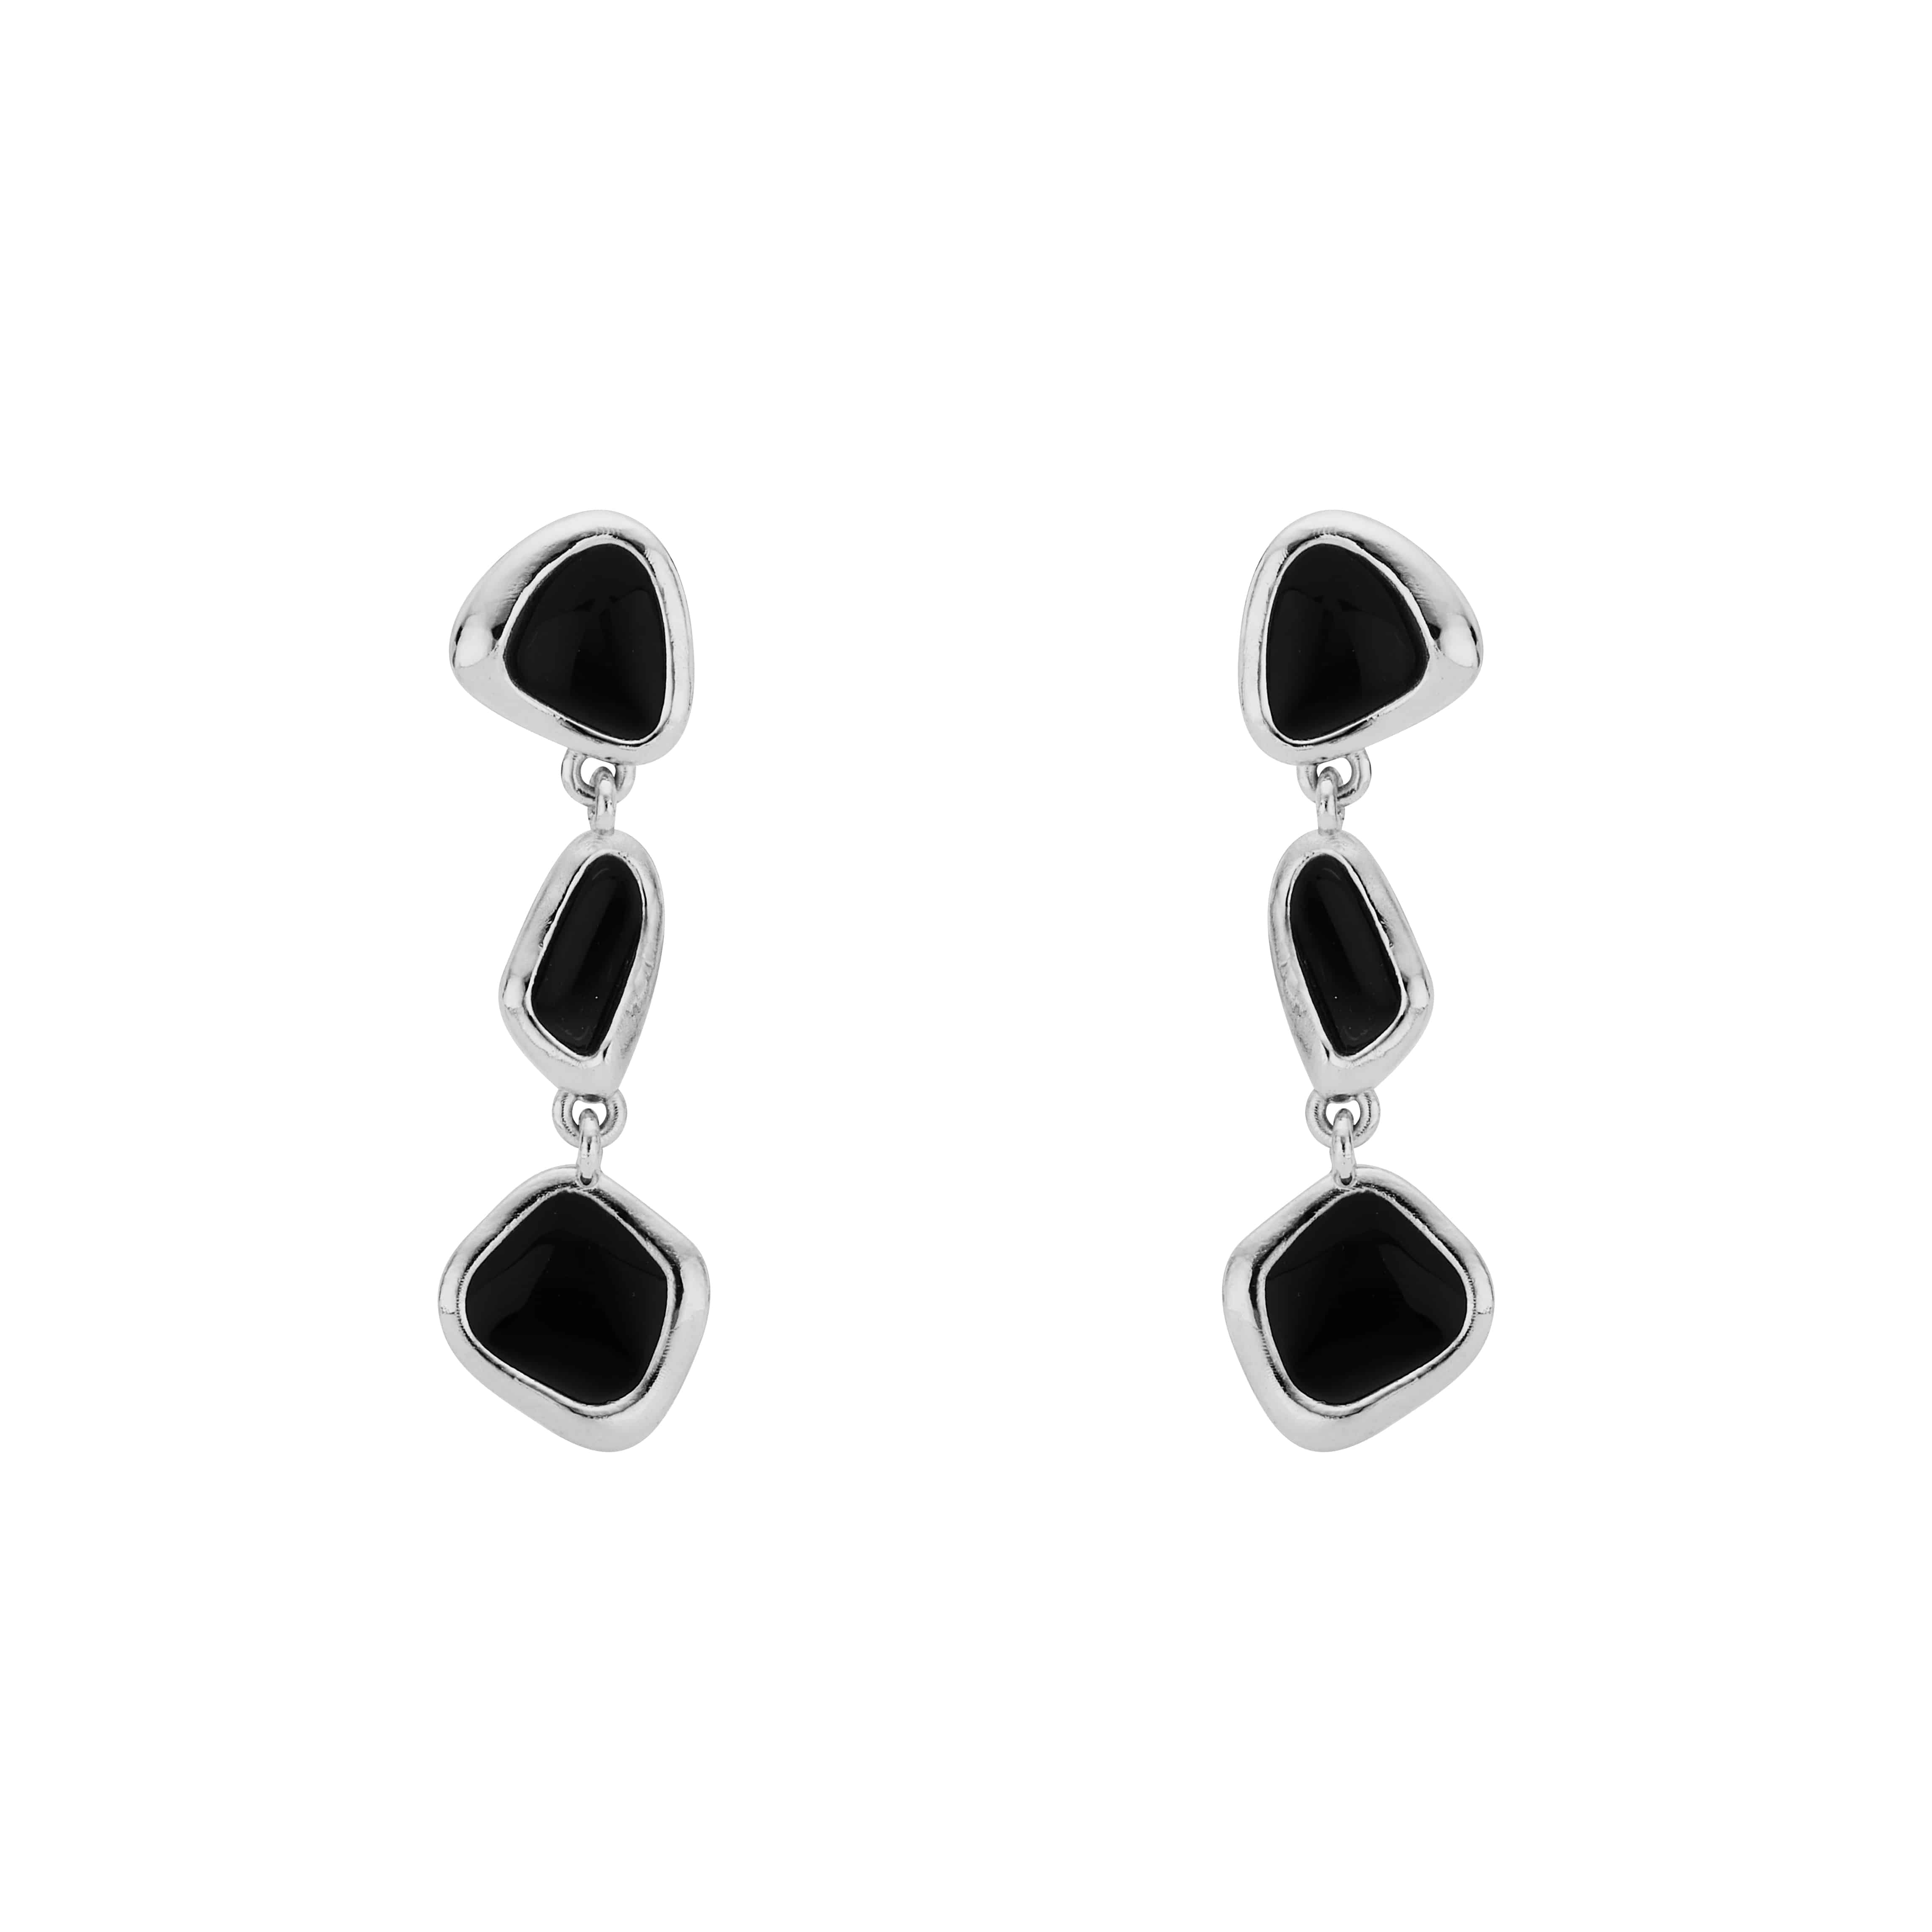 Atypical Button Shape Earring